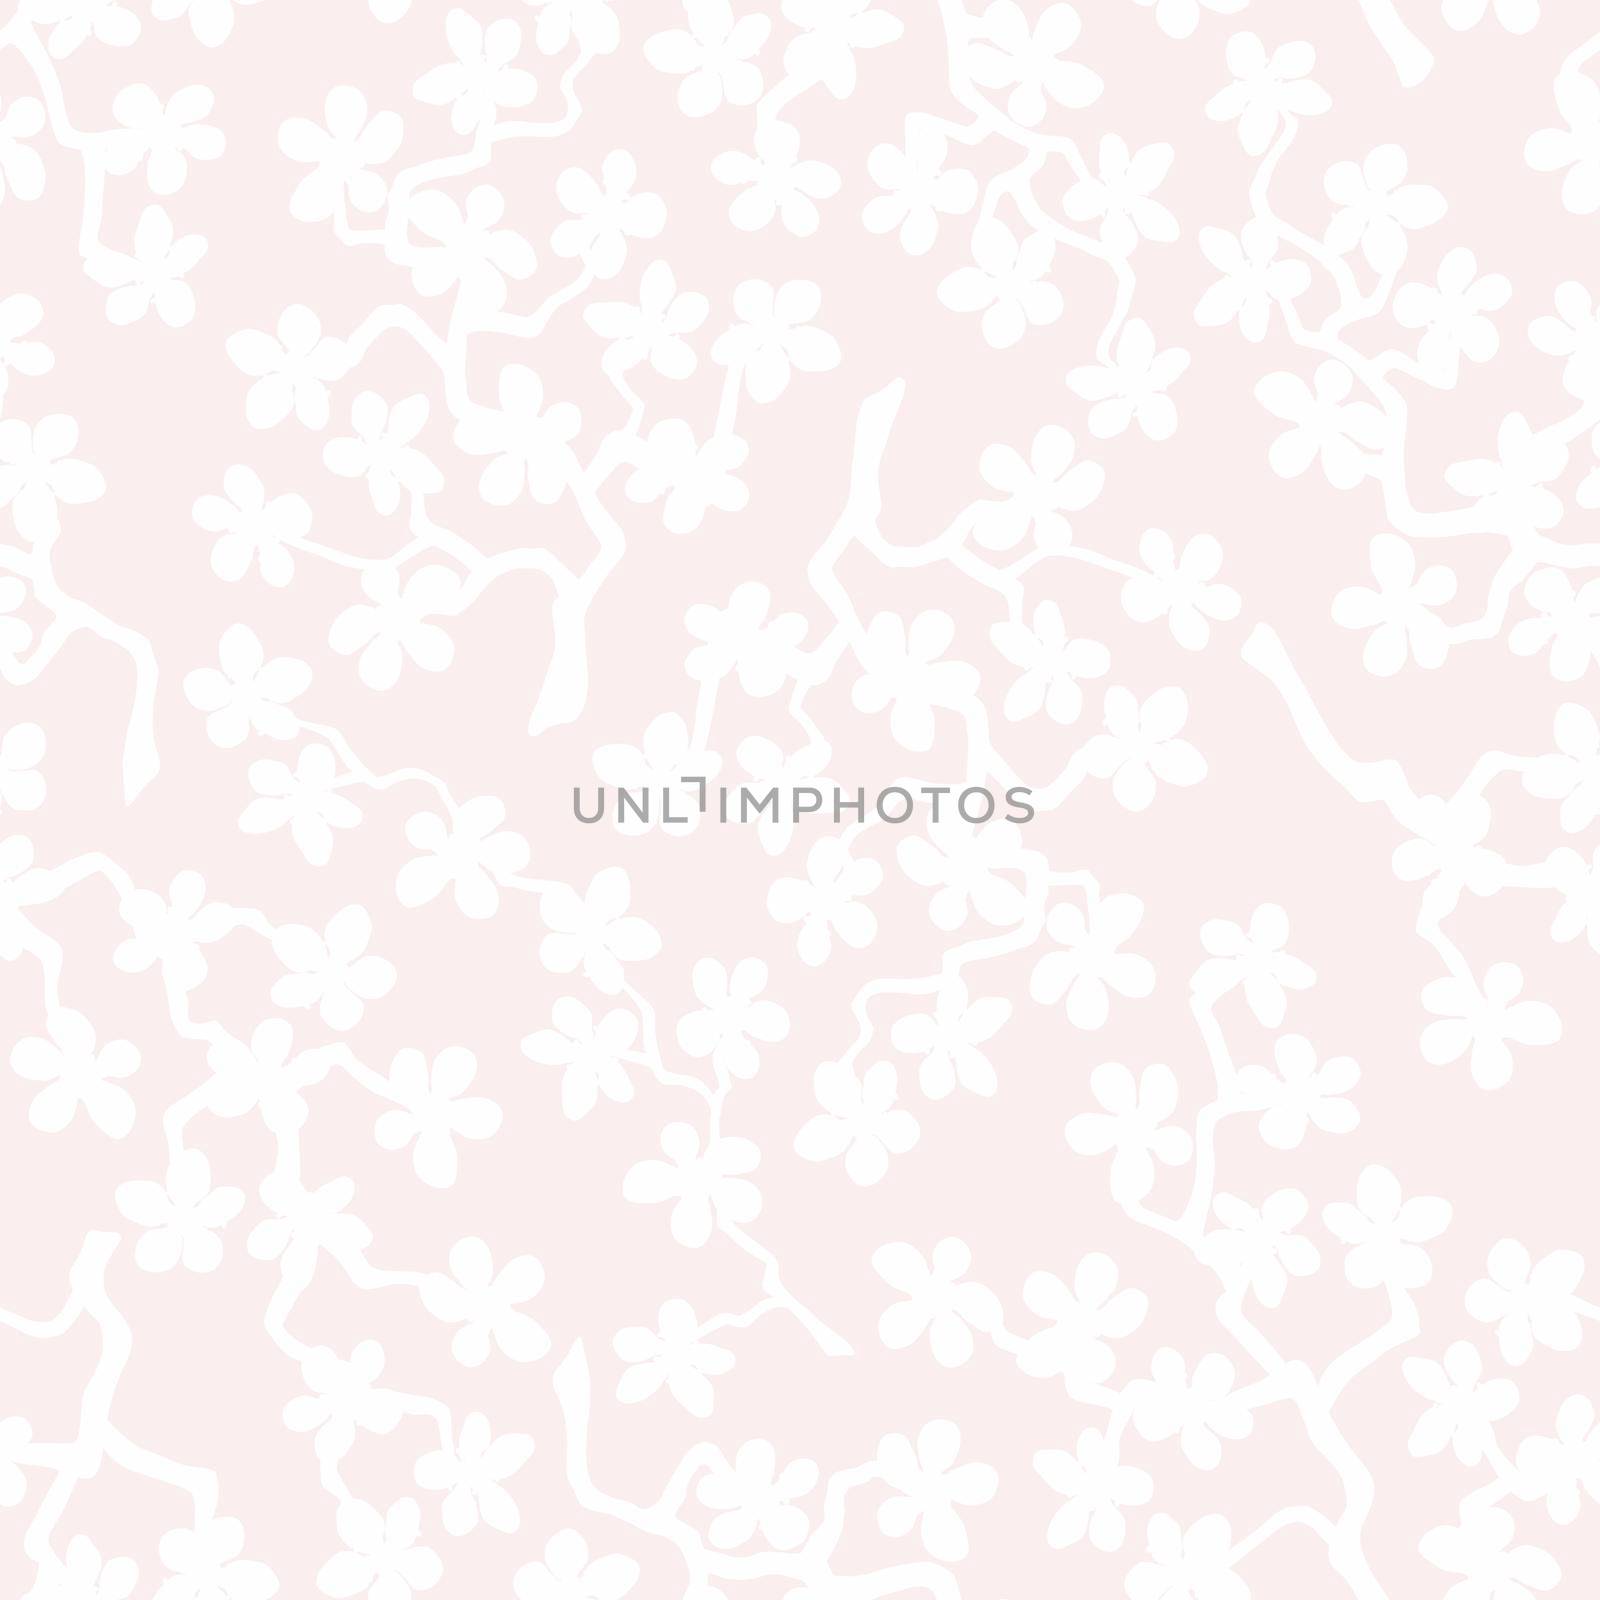 Seamless pattern with blossoming Japanese cherry sakura branches for fabric, packaging, wallpaper, textile decor, design, invitations, print, gift wrap, manufacturing. White flowers on pink background